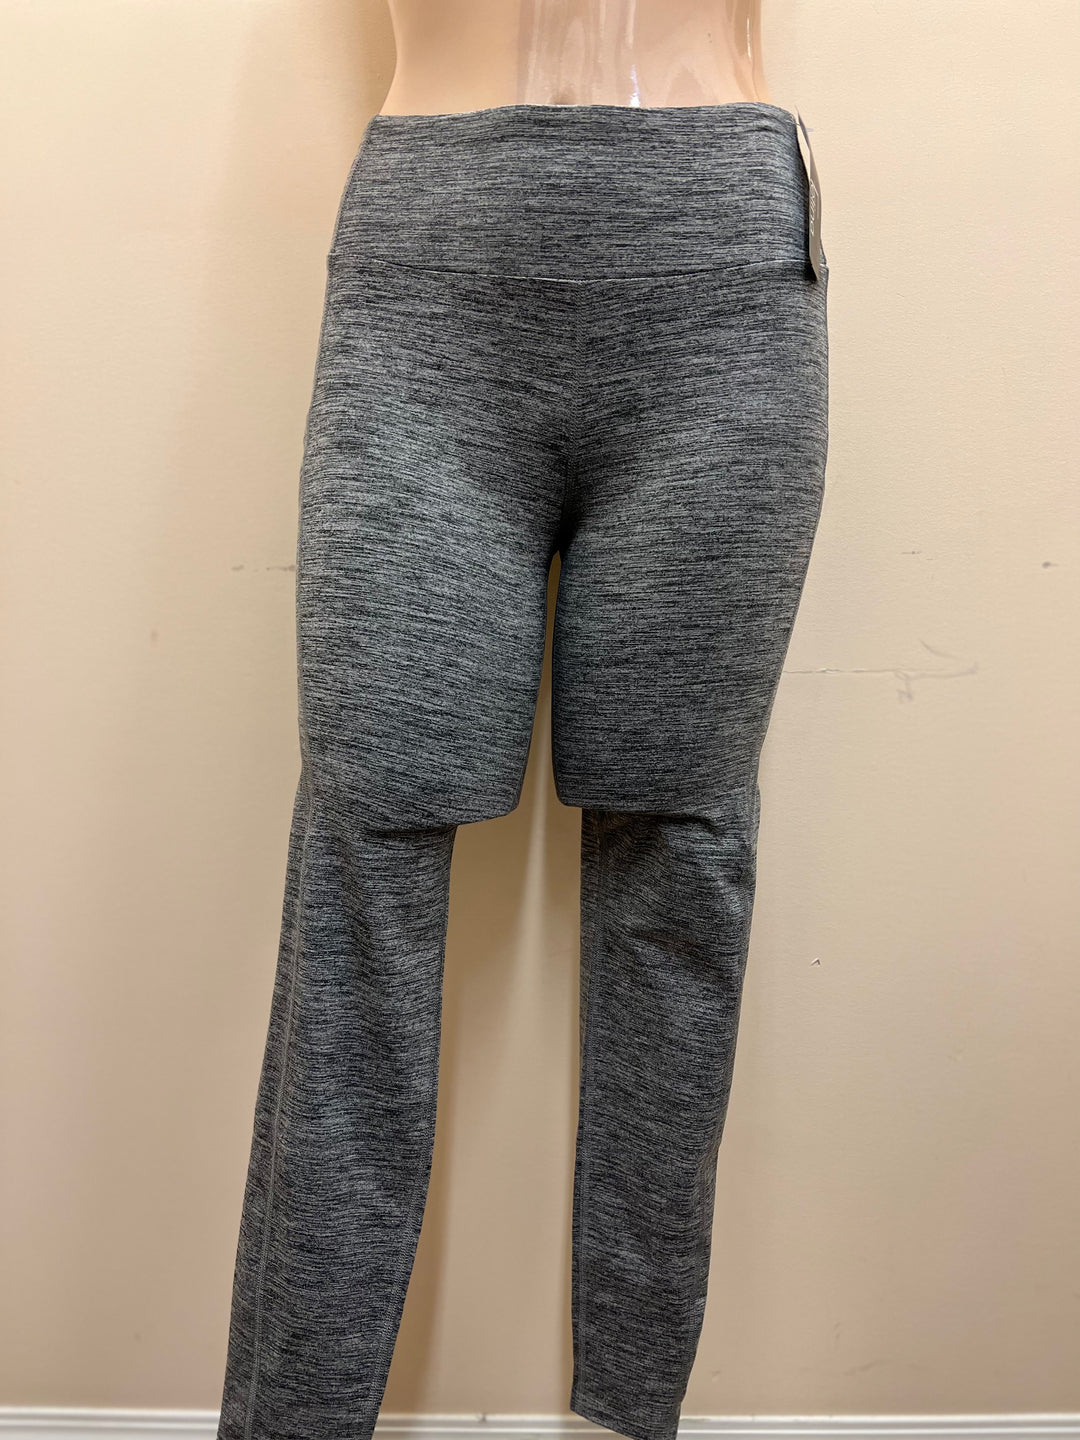 Curved Pocket 7/8 Legging - Size Small